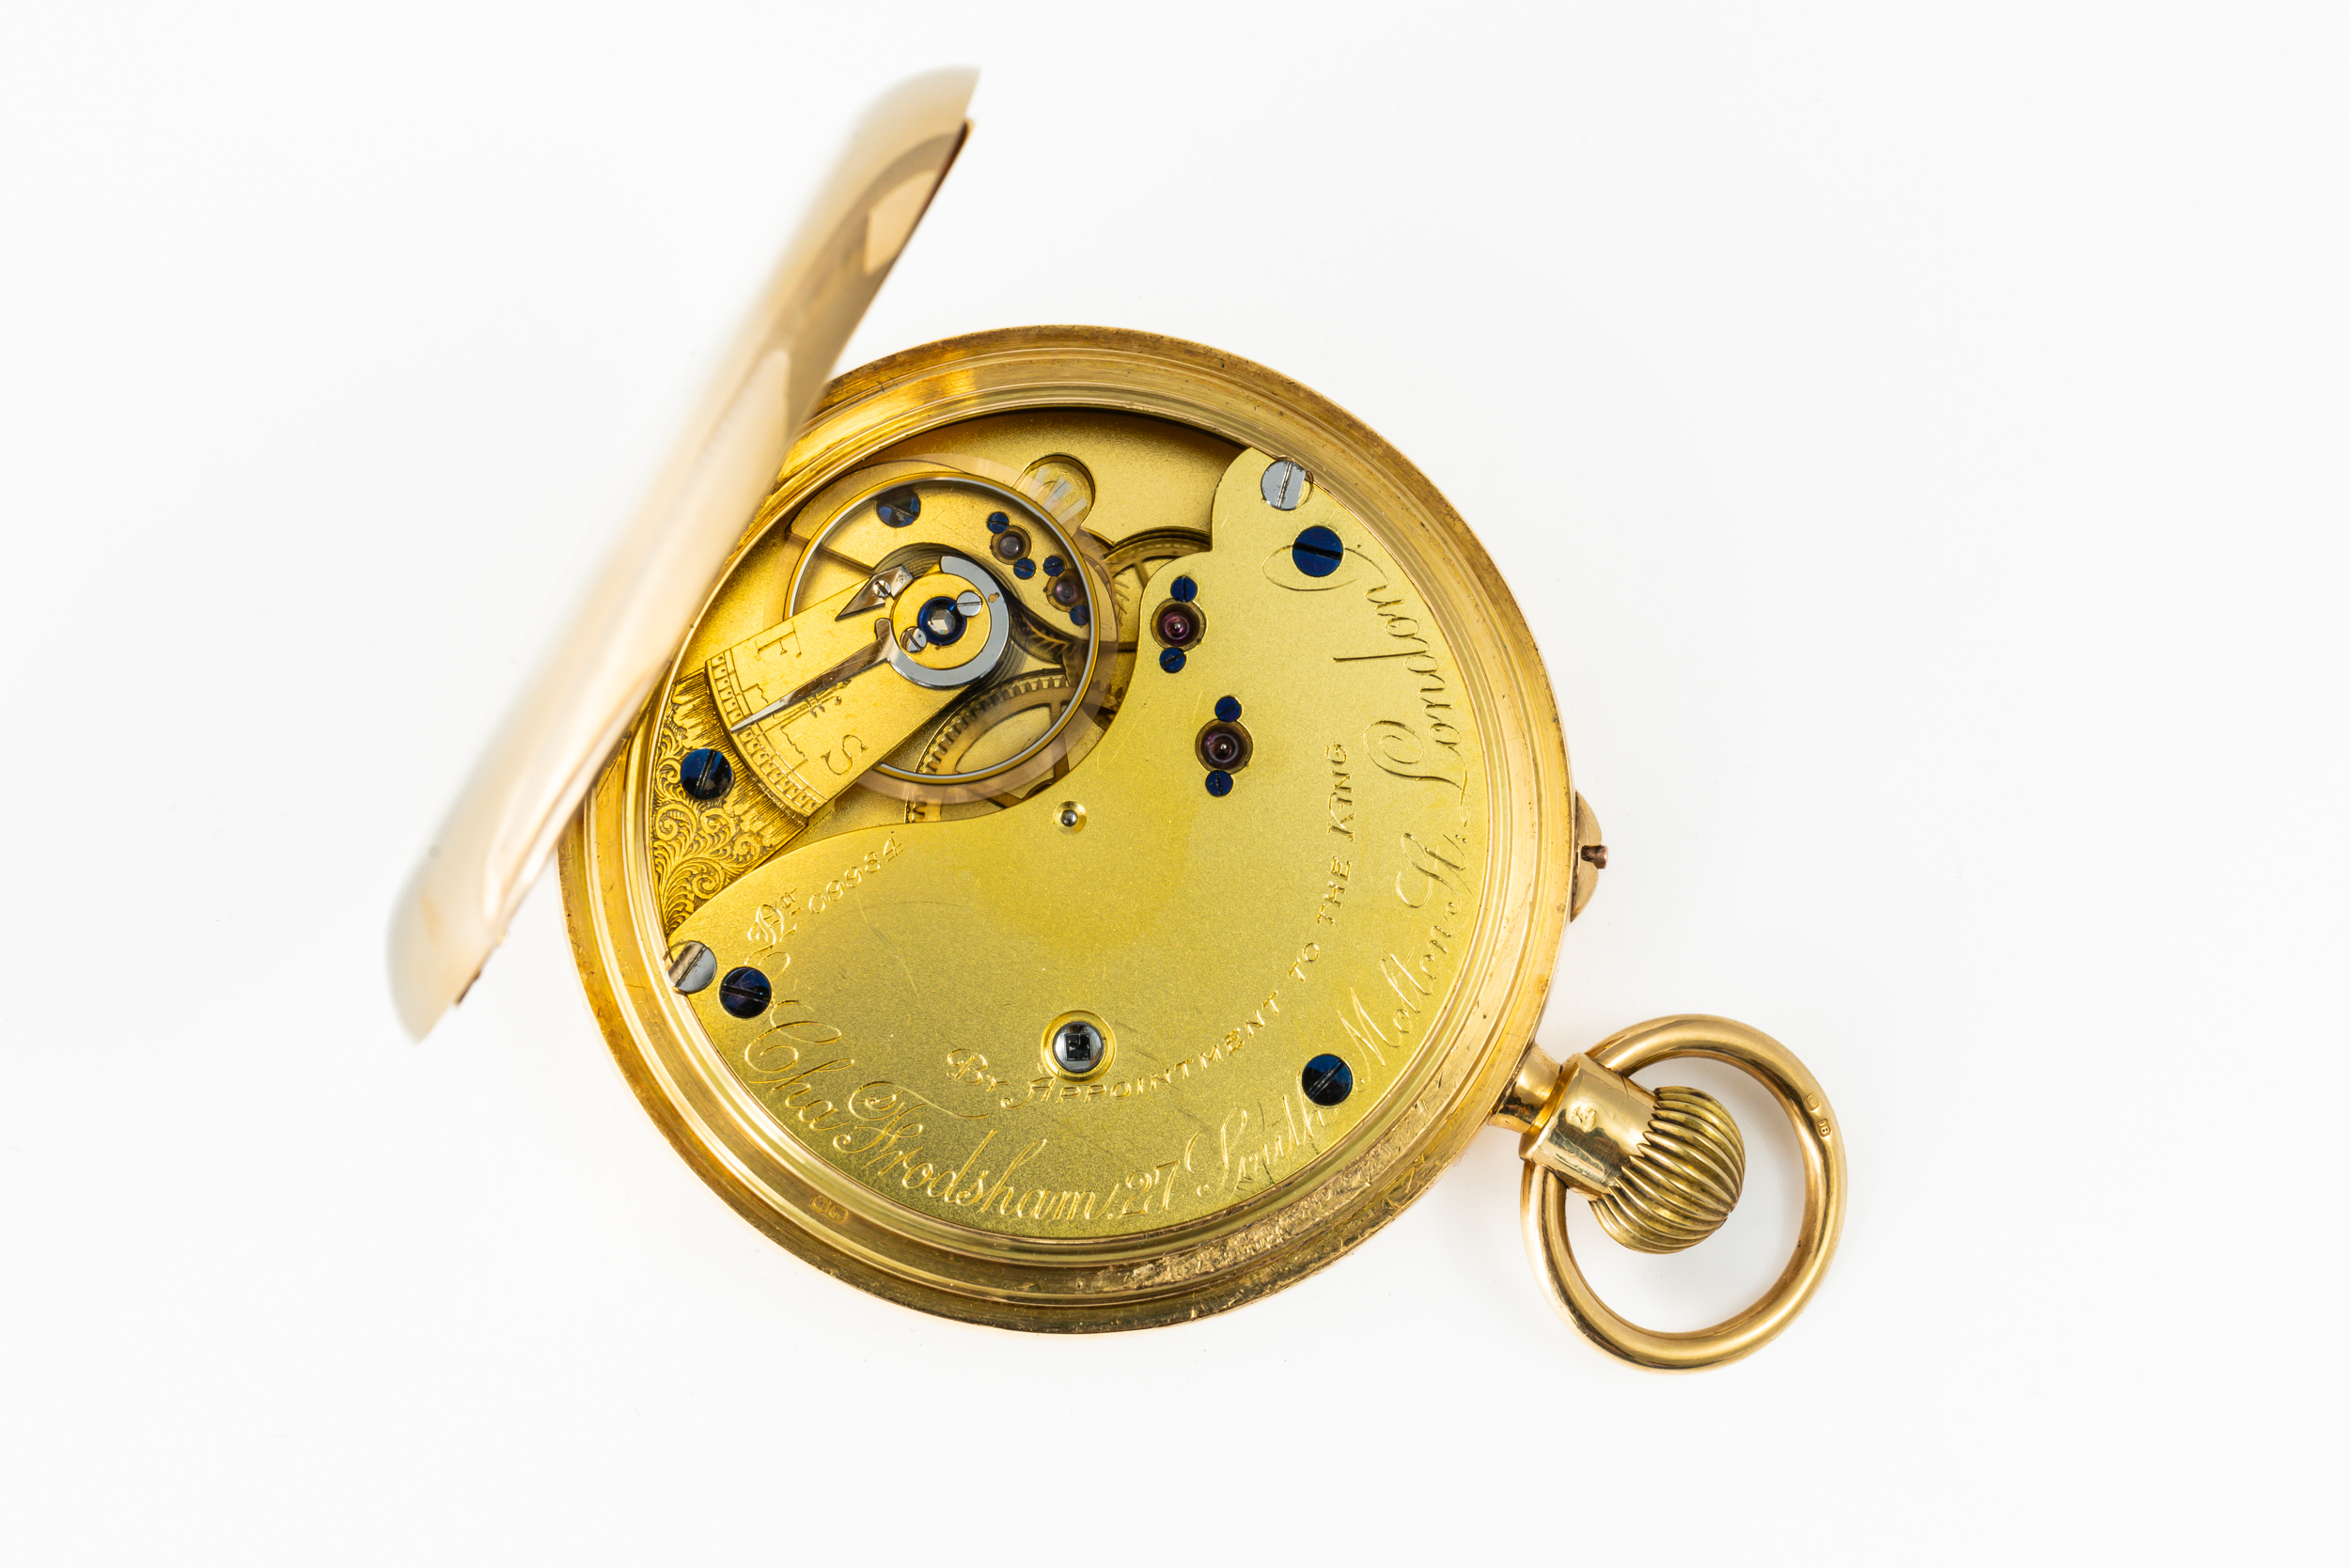 A CHARLES FRODSHAM 18CT GOLD, KEYLESS WIND HUNTING CASED GENTLEMAN'S POCKET WATCH - Image 4 of 4